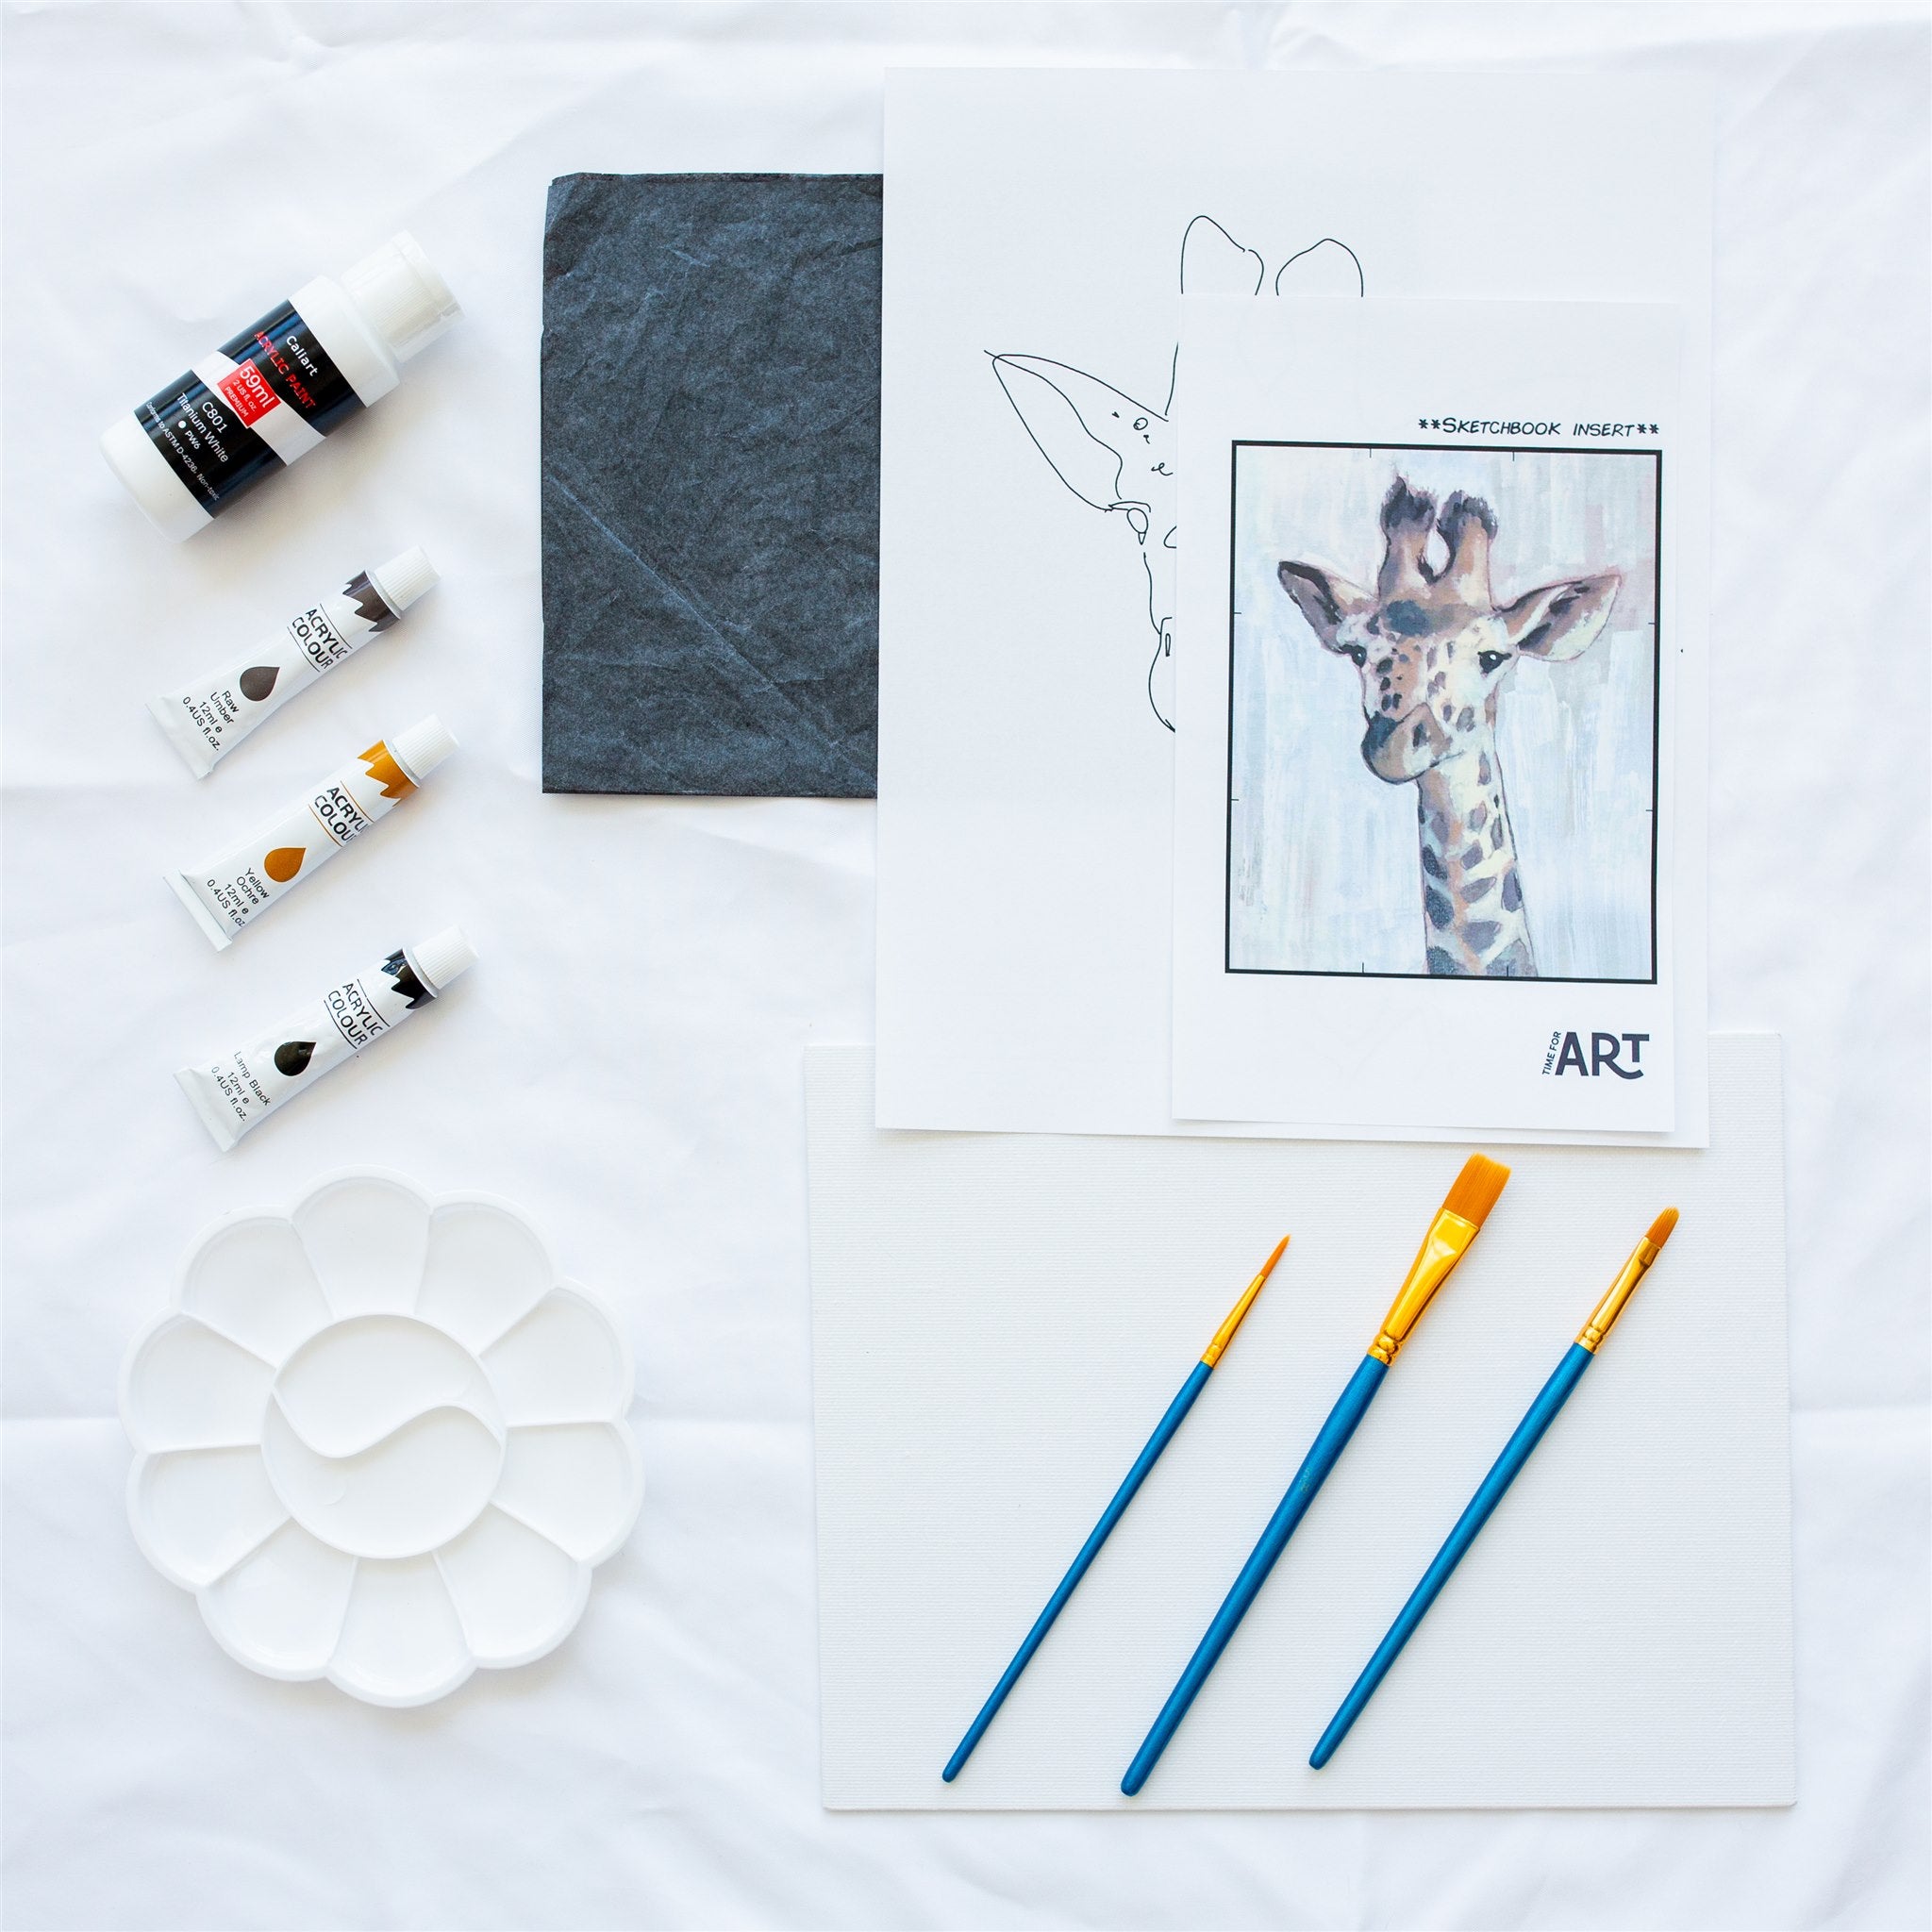 Whats included in the baby giraffe painting kit. 4 acrylic paints, painters pallet, brushes, canvas panel, traceable outline, and reference image.